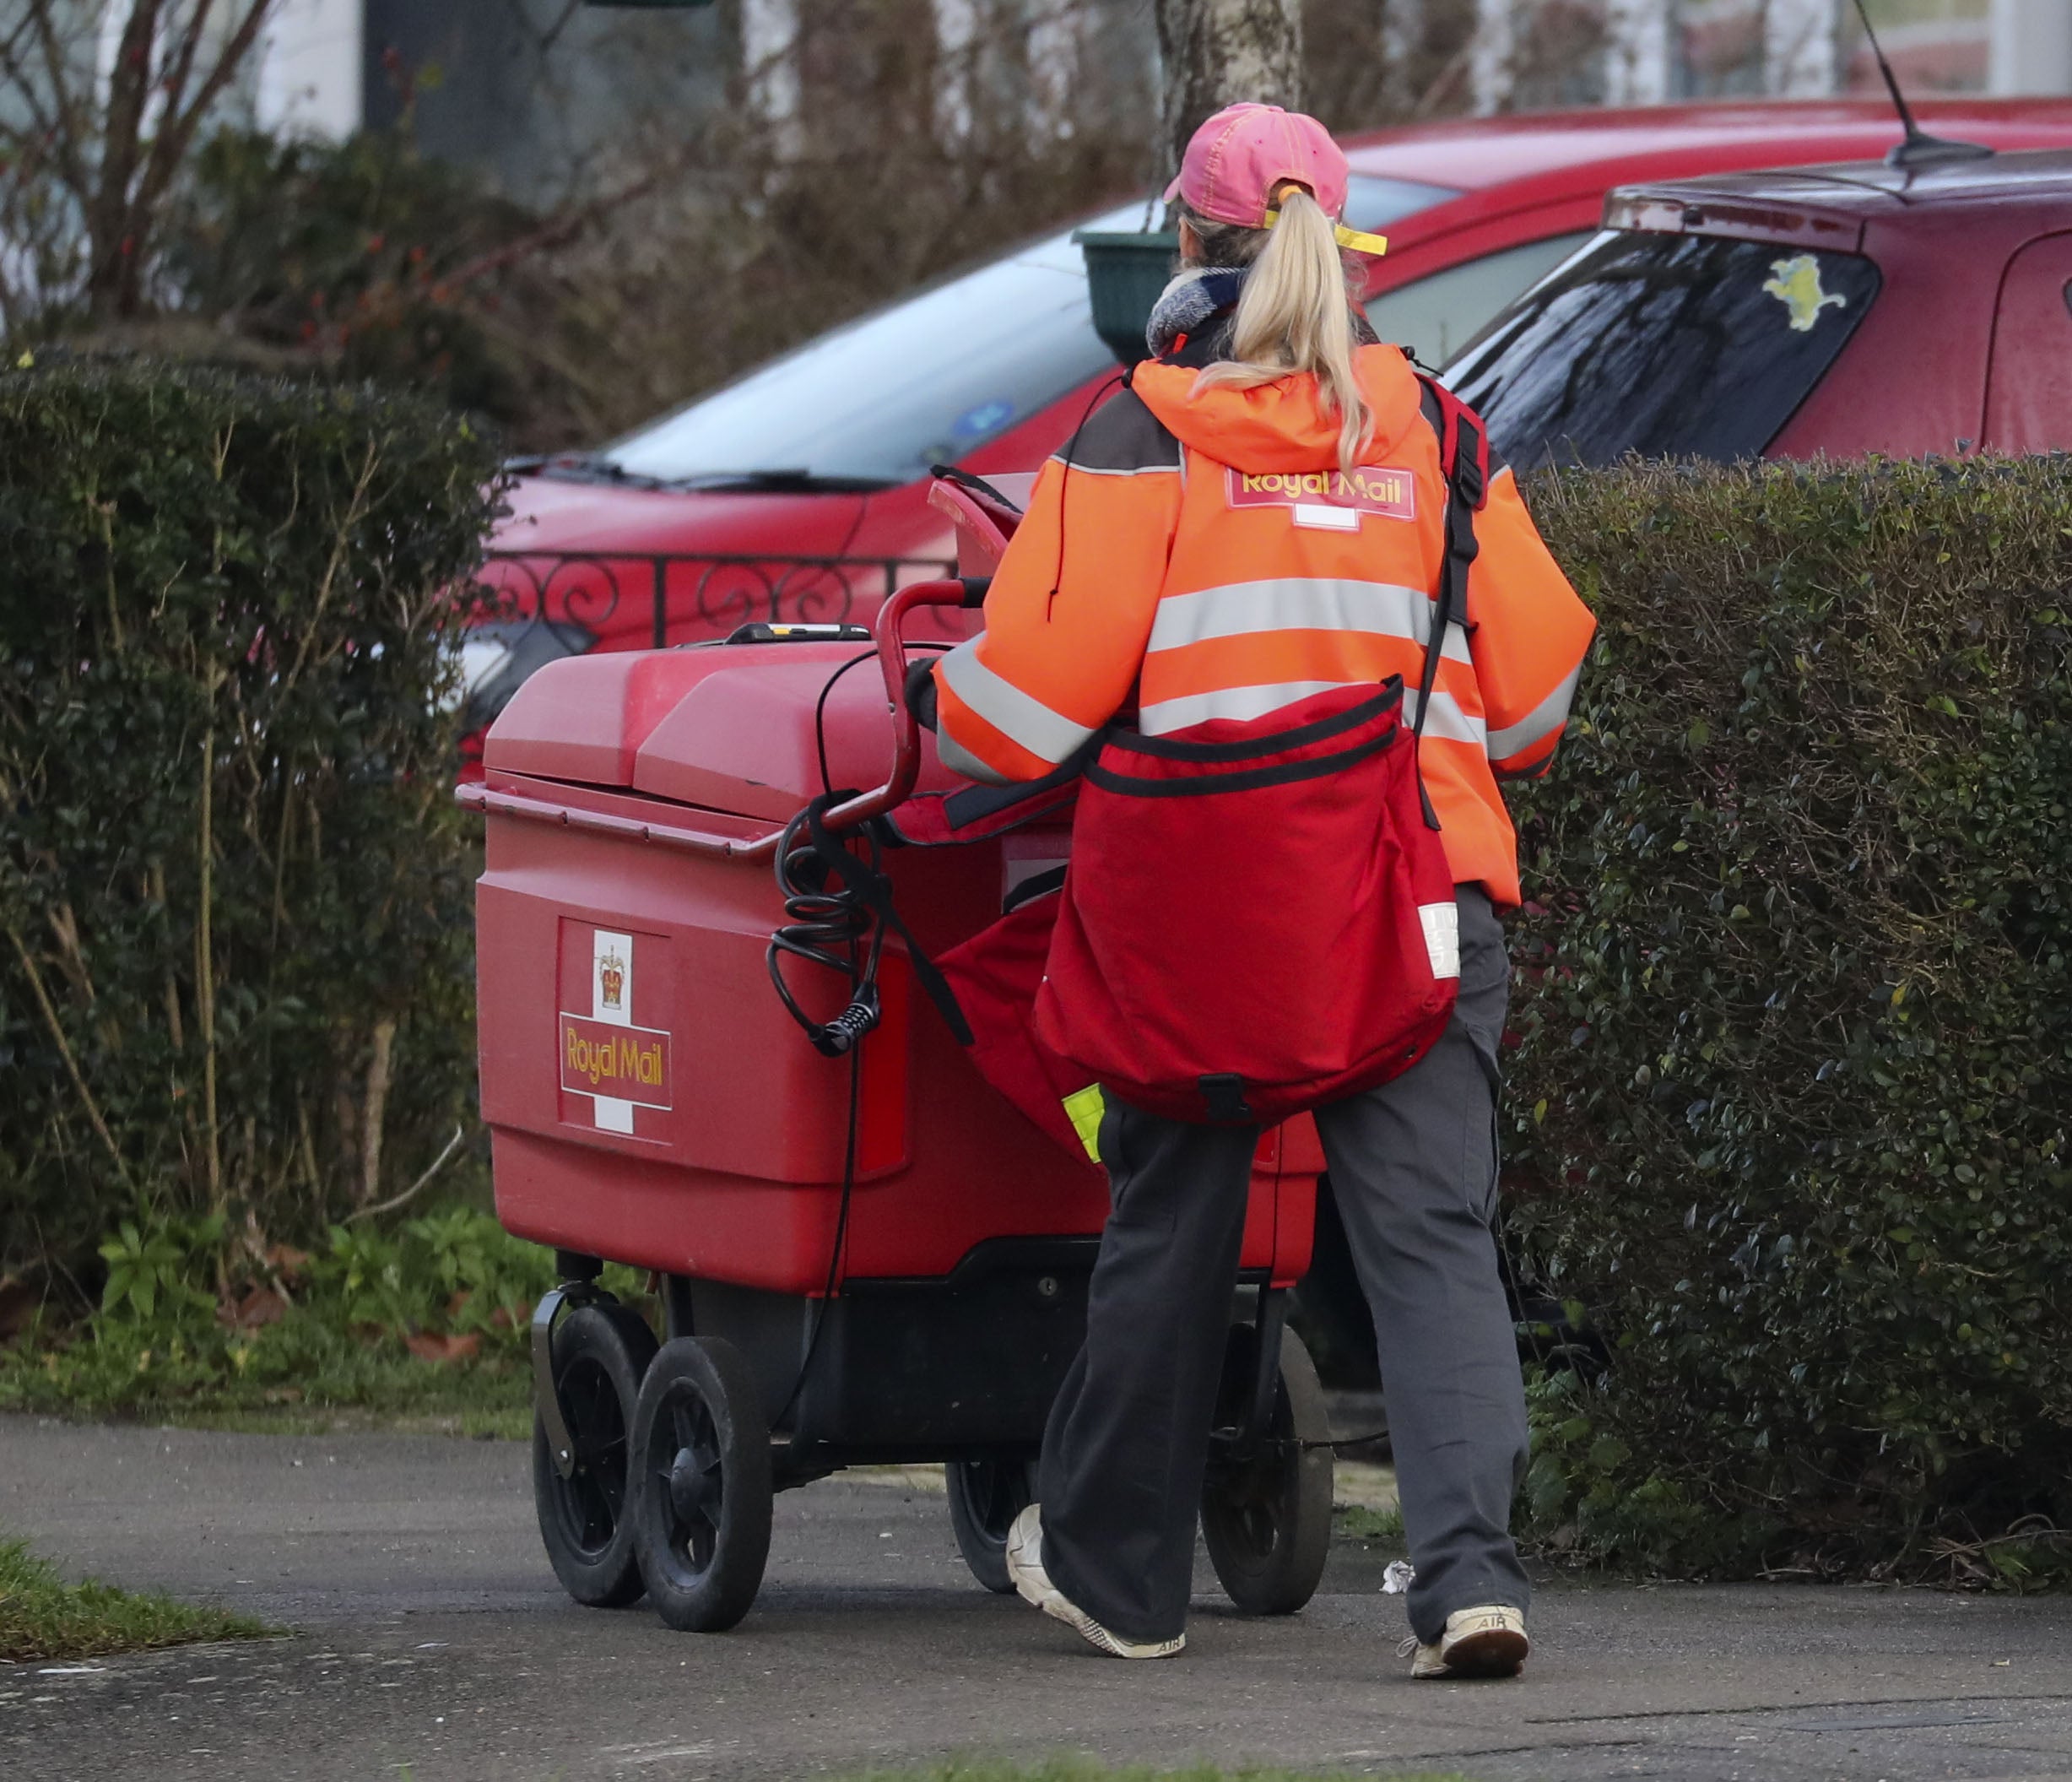 Royal Mail fared well on speculation it will do well if people return to online shopping (Steve Parsons/PA)